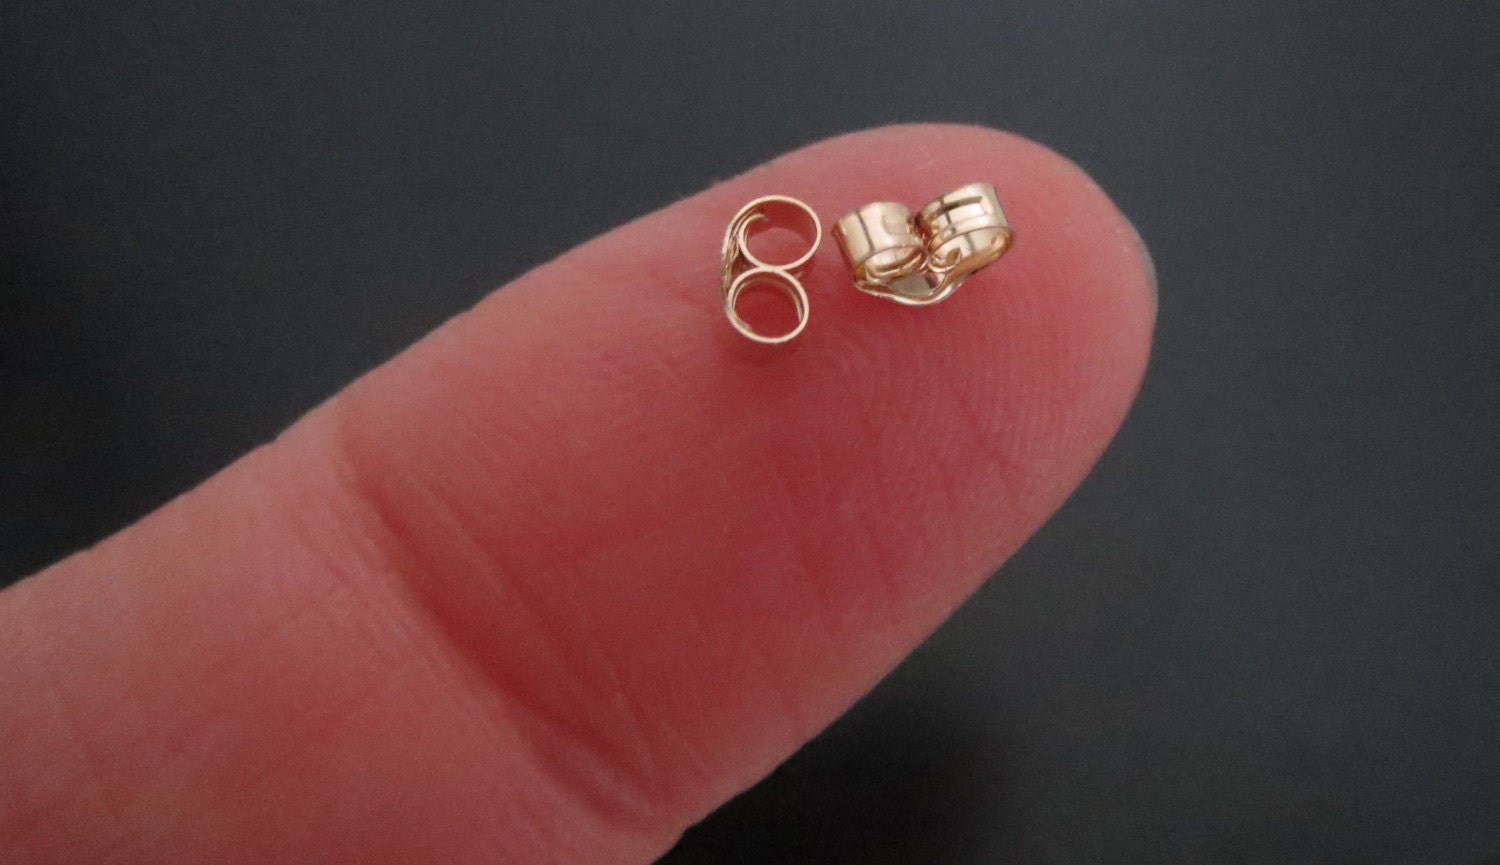 Tiny 14k Solid Gold Ear Nuts / Gold Earring Backs for Thin Post